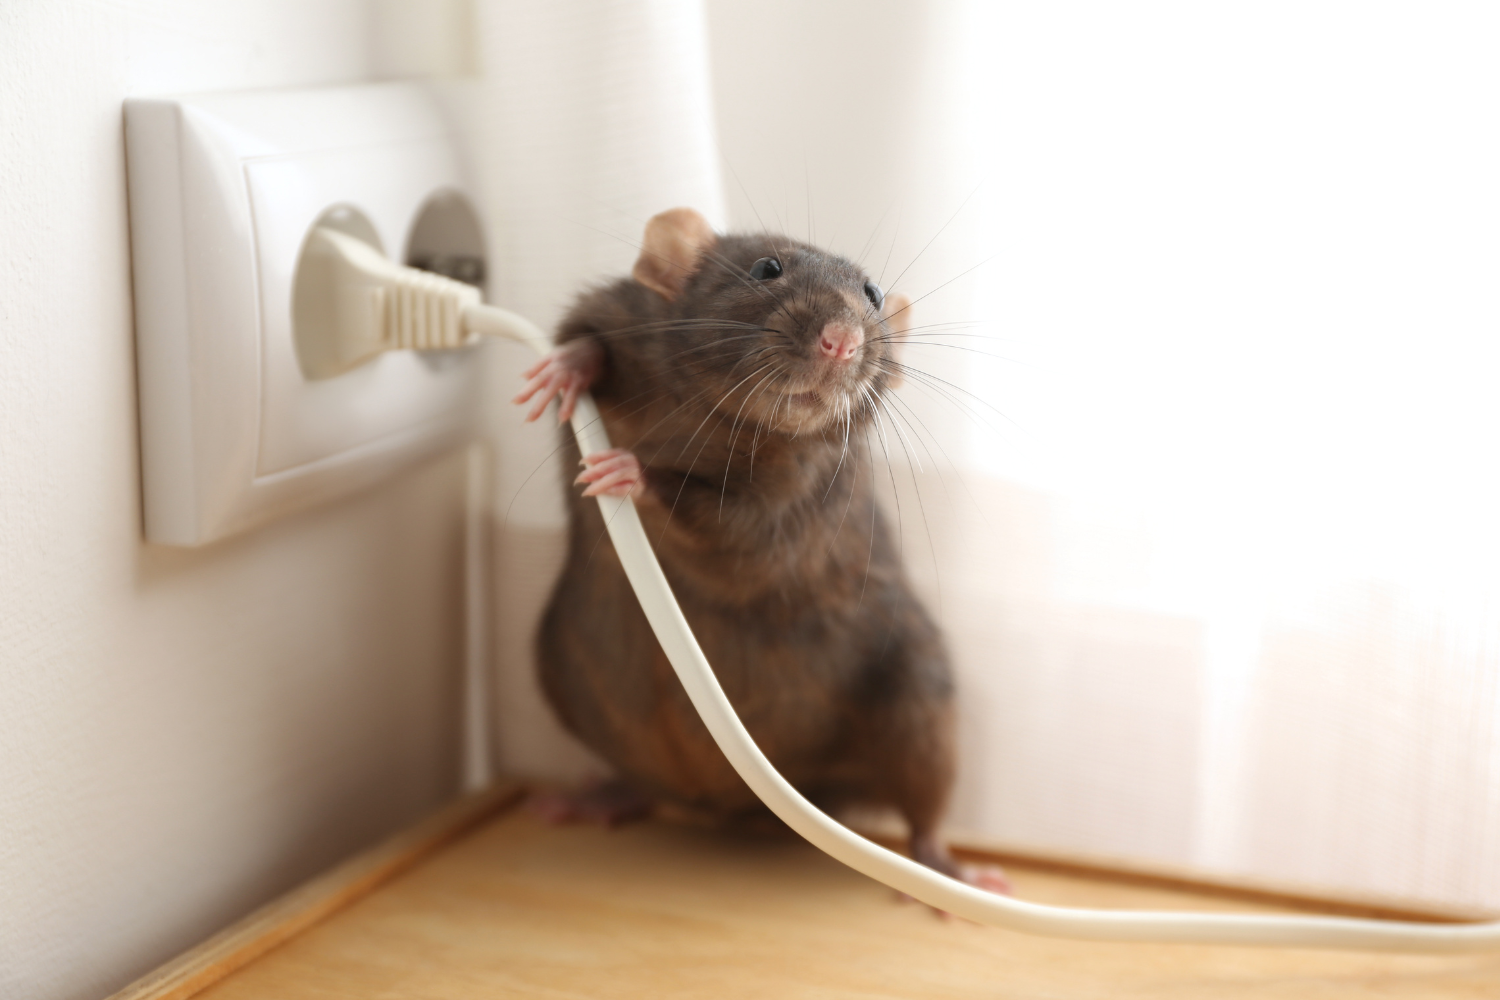 rodent chewing on an electrical cord